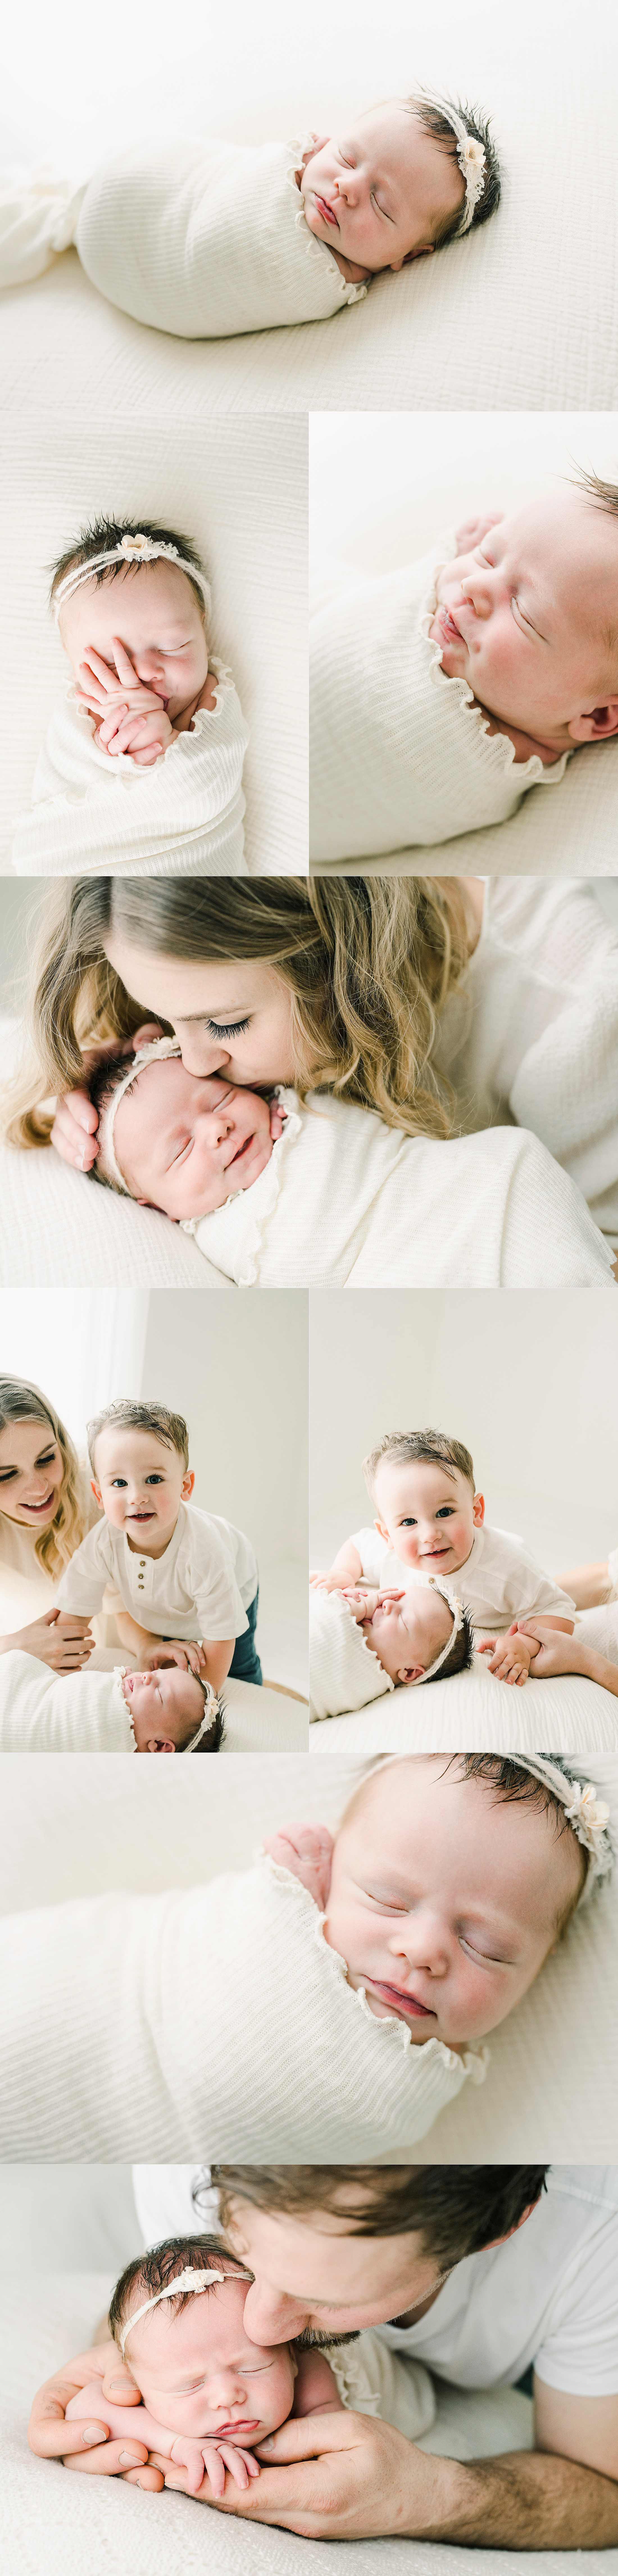 mother gently kisses her newborn baby in natural light, all white studio setting